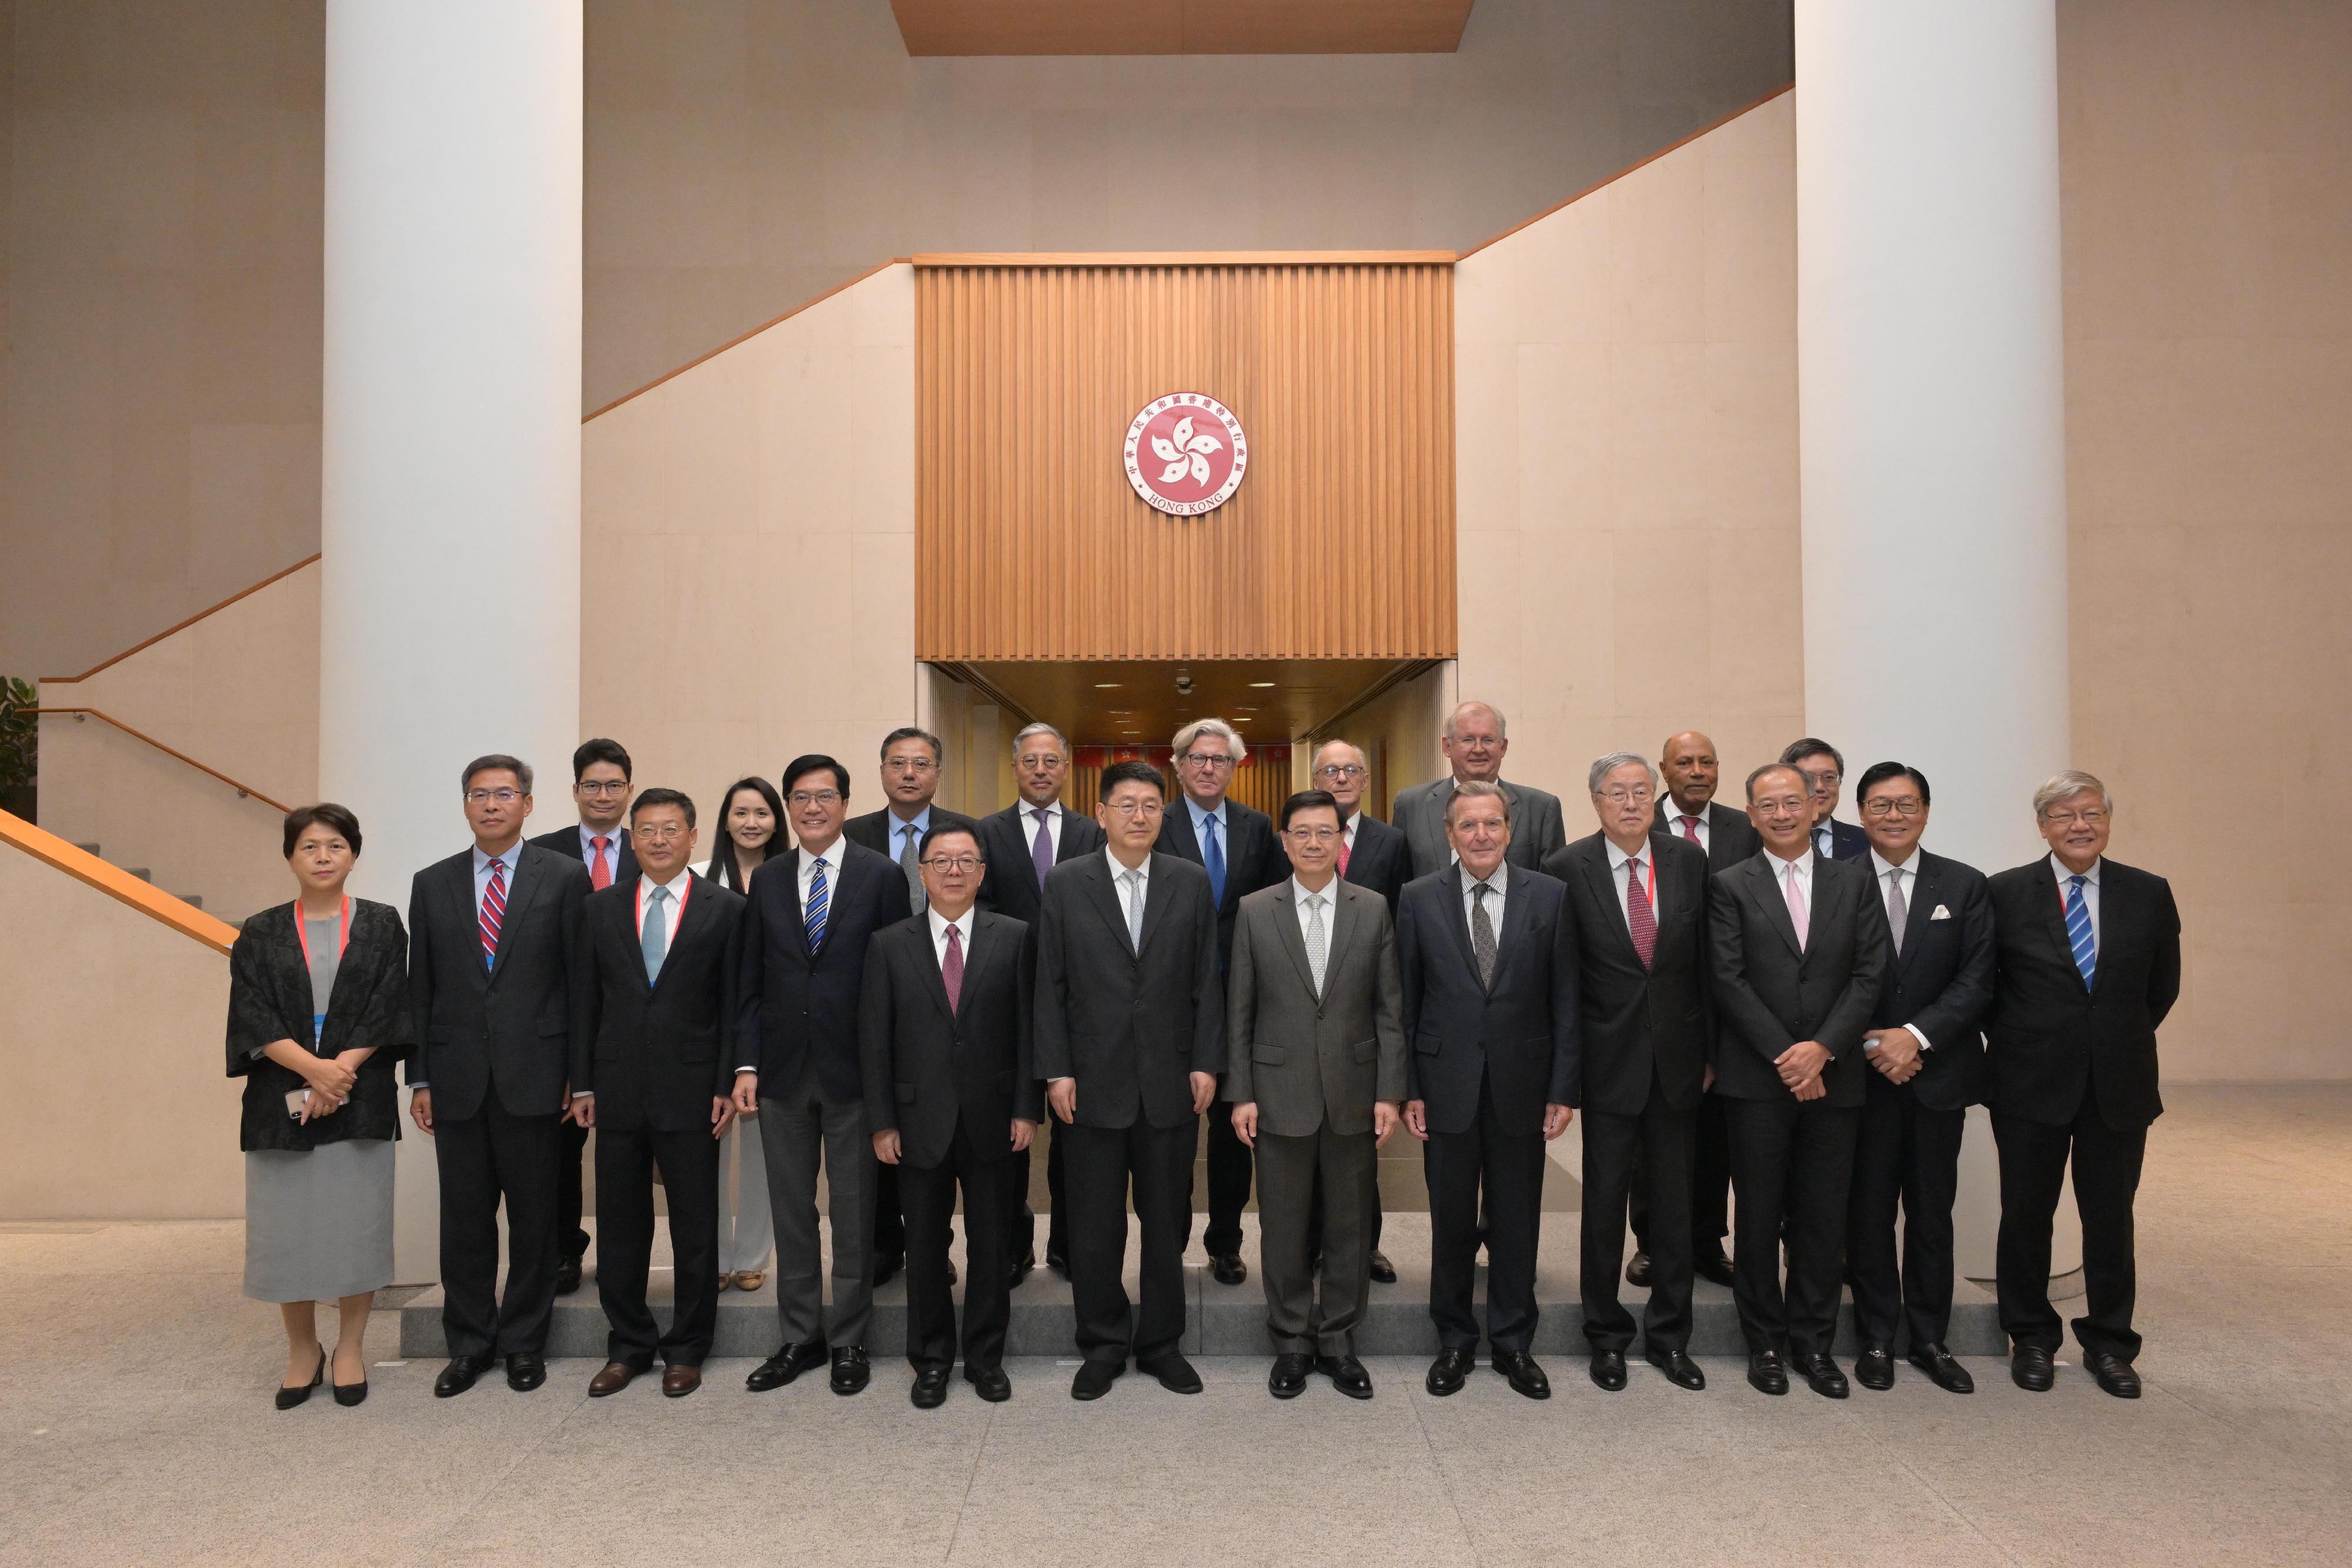 The Chief Executive, Mr John Lee (front row, sixth right), today (September 19) meets with the Chairman and Chief Executive Officer of China Investment Corporation (CIC), Mr Peng Chun (front row, sixth left), and members of the International Advisory Council of CIC. The Deputy Financial Secretary, Mr Michael Wong (front row, fourth left); the Chief Executive of the Hong Kong Monetary Authority, Mr Eddie Yue (front row, third right); and the Acting Secretary for Financial Services and the Treasury, Mr Joseph Chan (back row, first left), also joined the meeting.